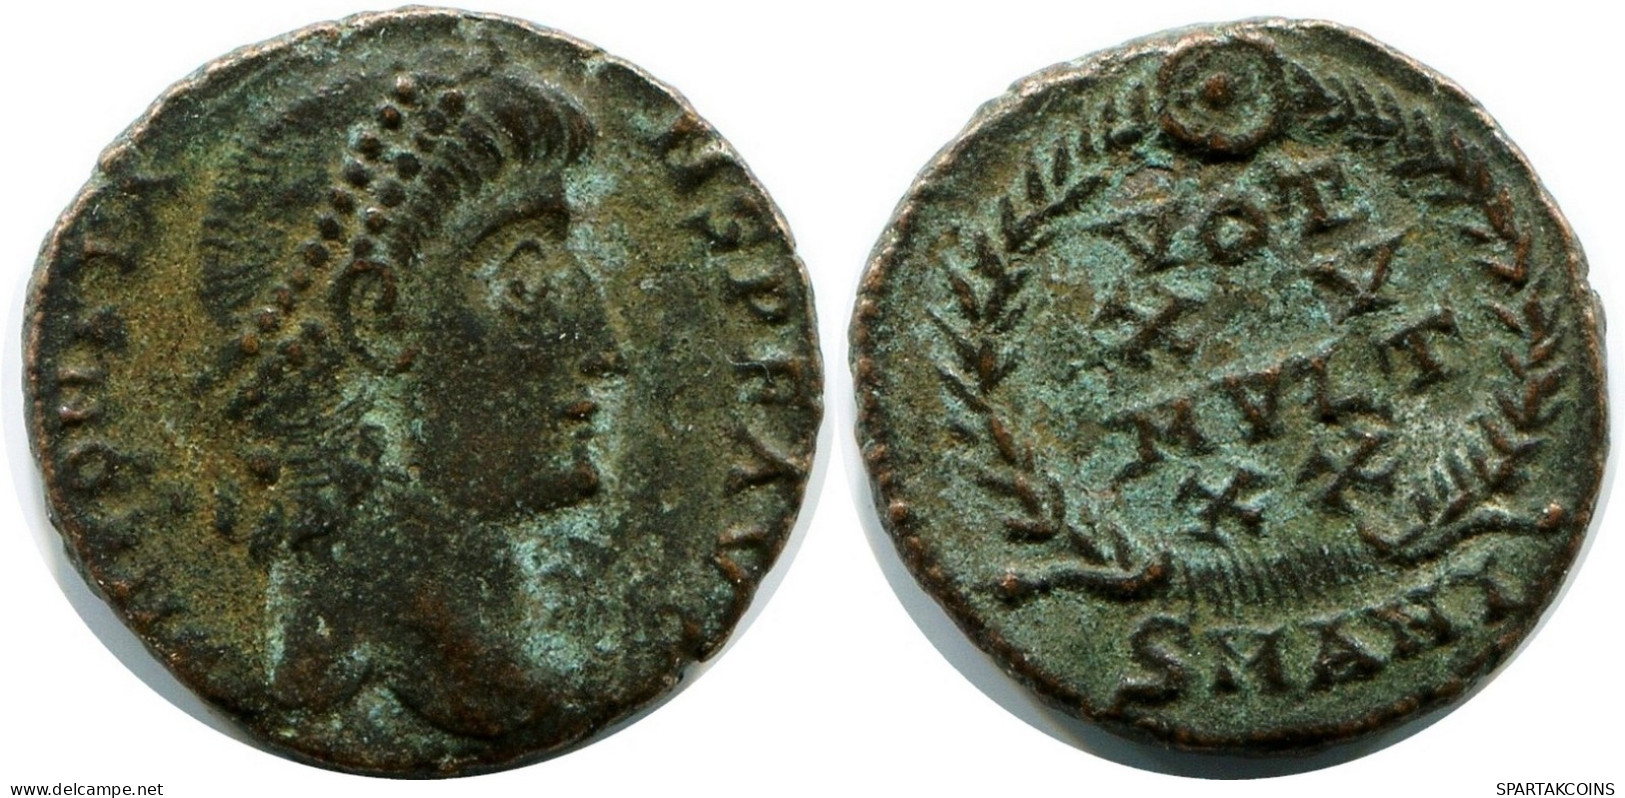 CONSTANS MINTED IN ANTIOCH FROM THE ROYAL ONTARIO MUSEUM #ANC11823.14.U.A - L'Empire Chrétien (307 à 363)